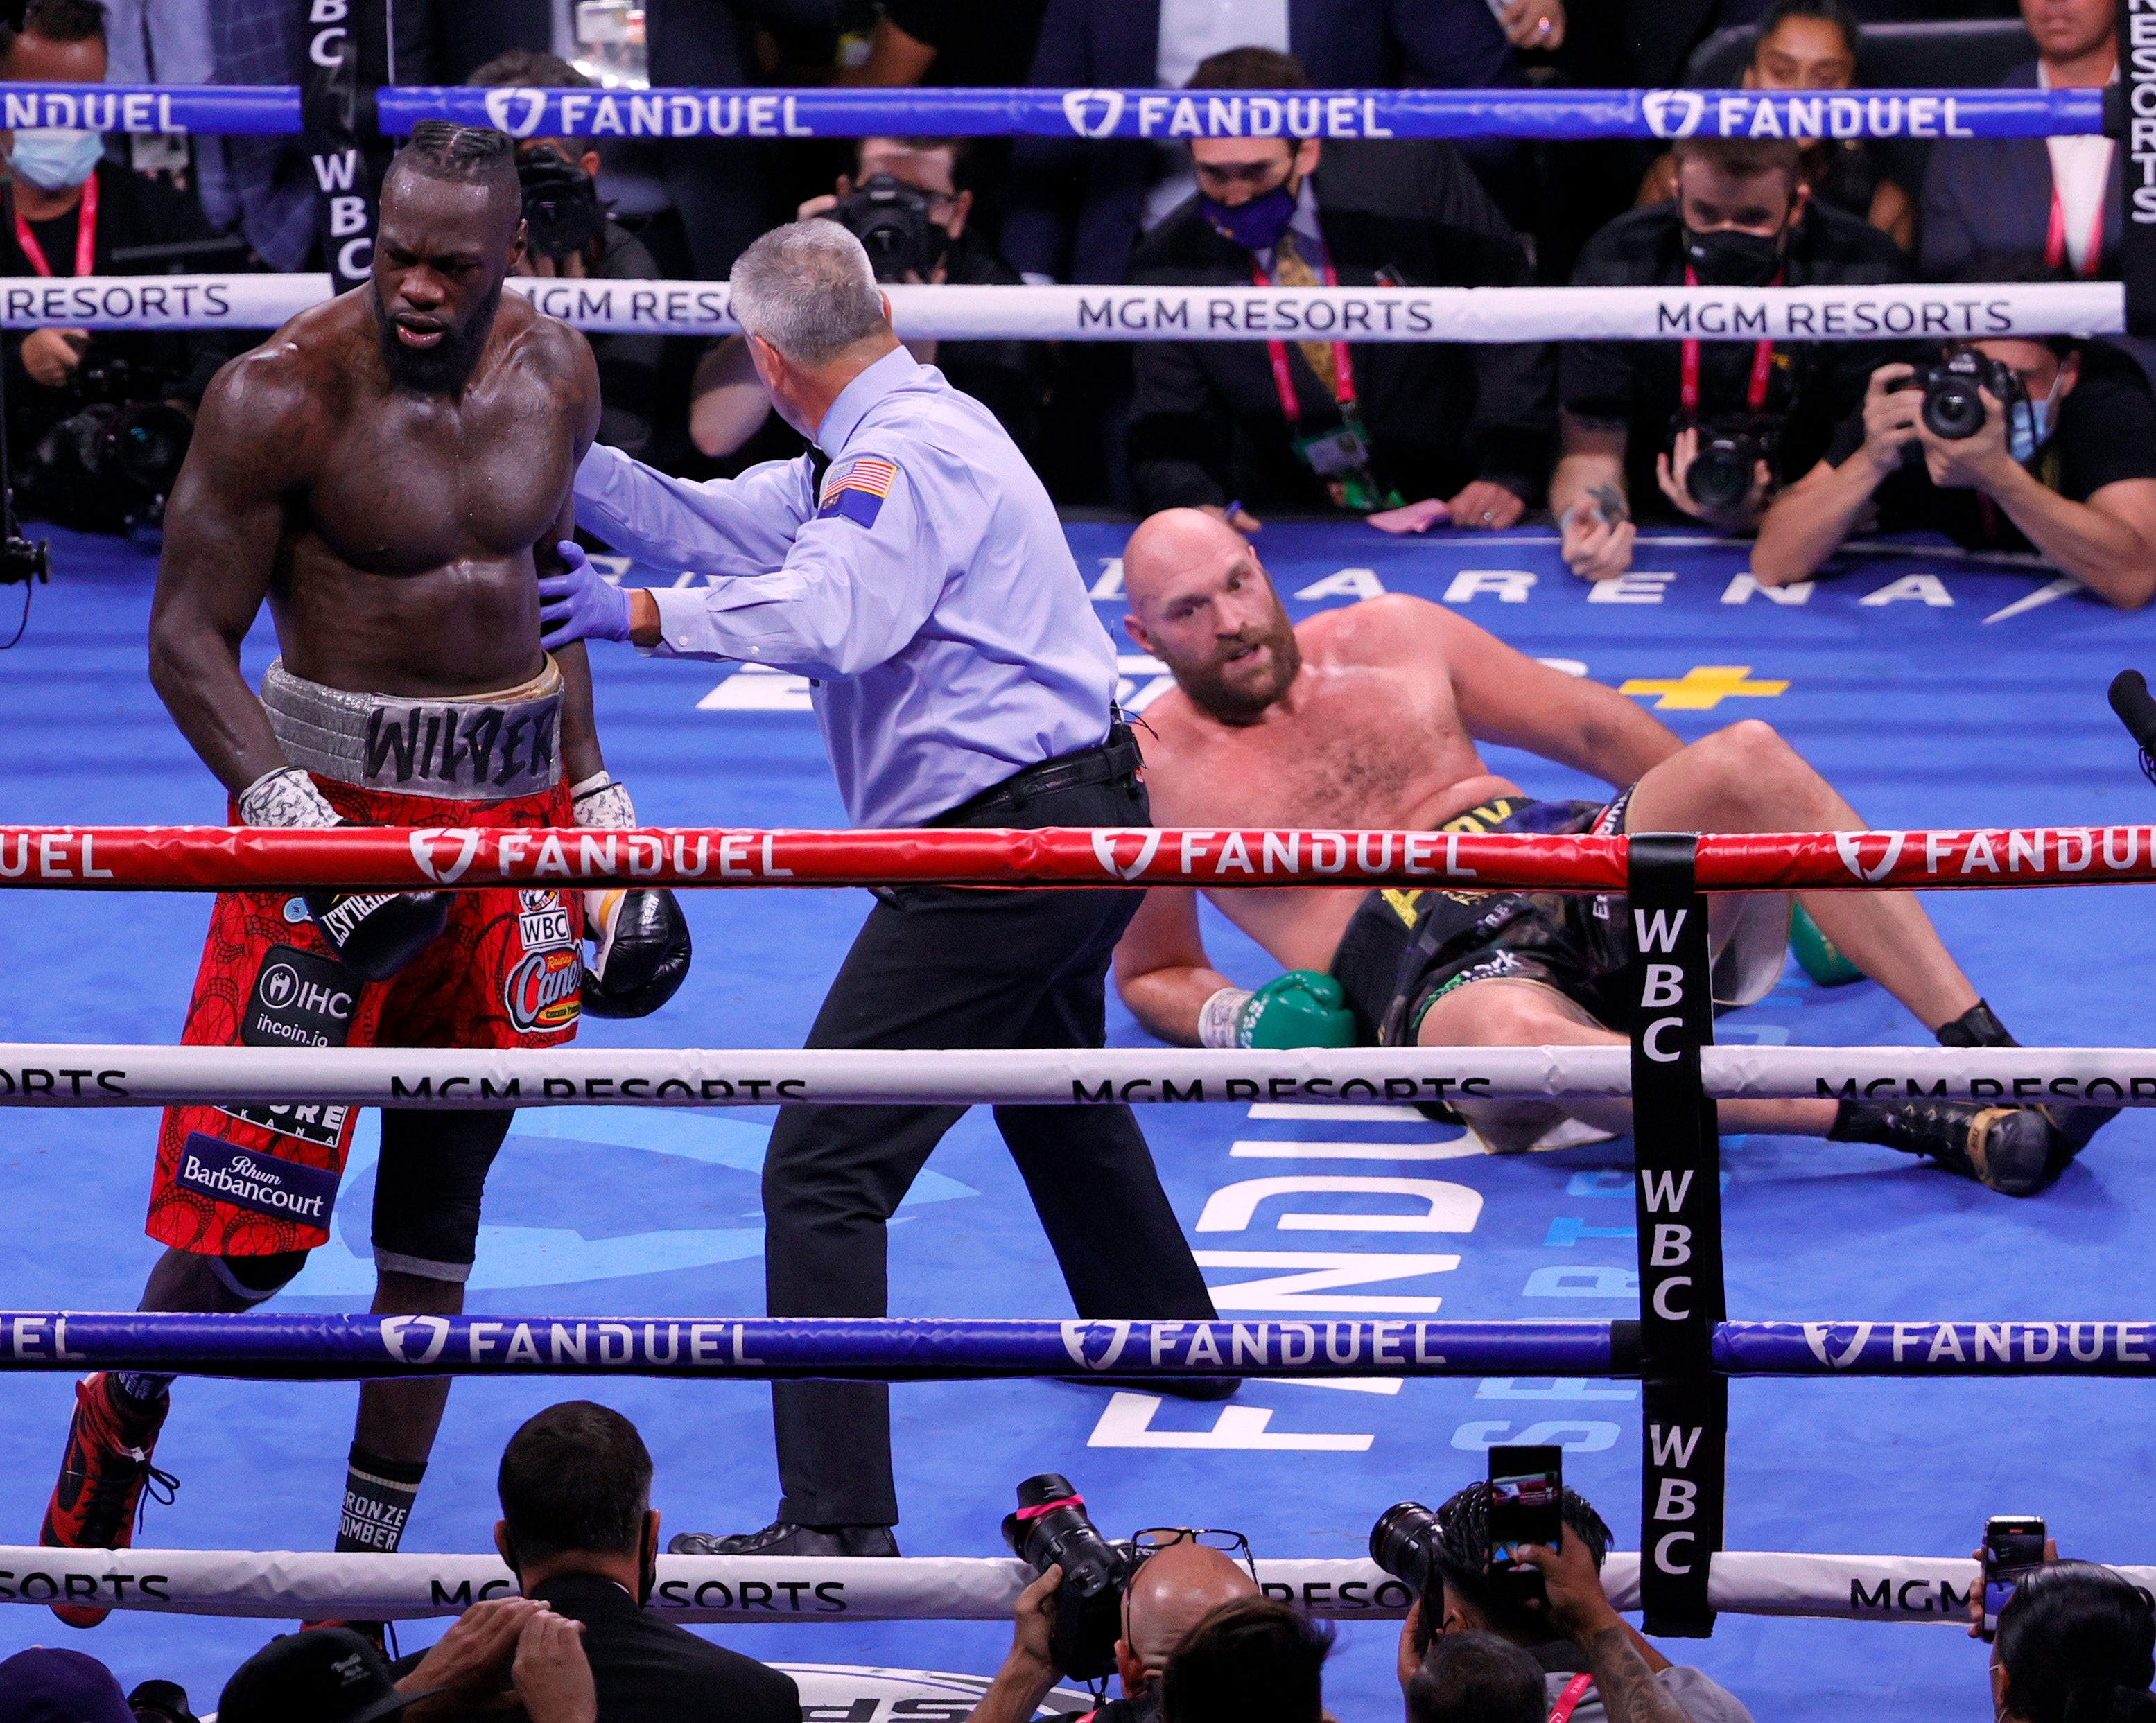 Deontay Wilder knocked Tyson Fury to the ground more than once during their fight